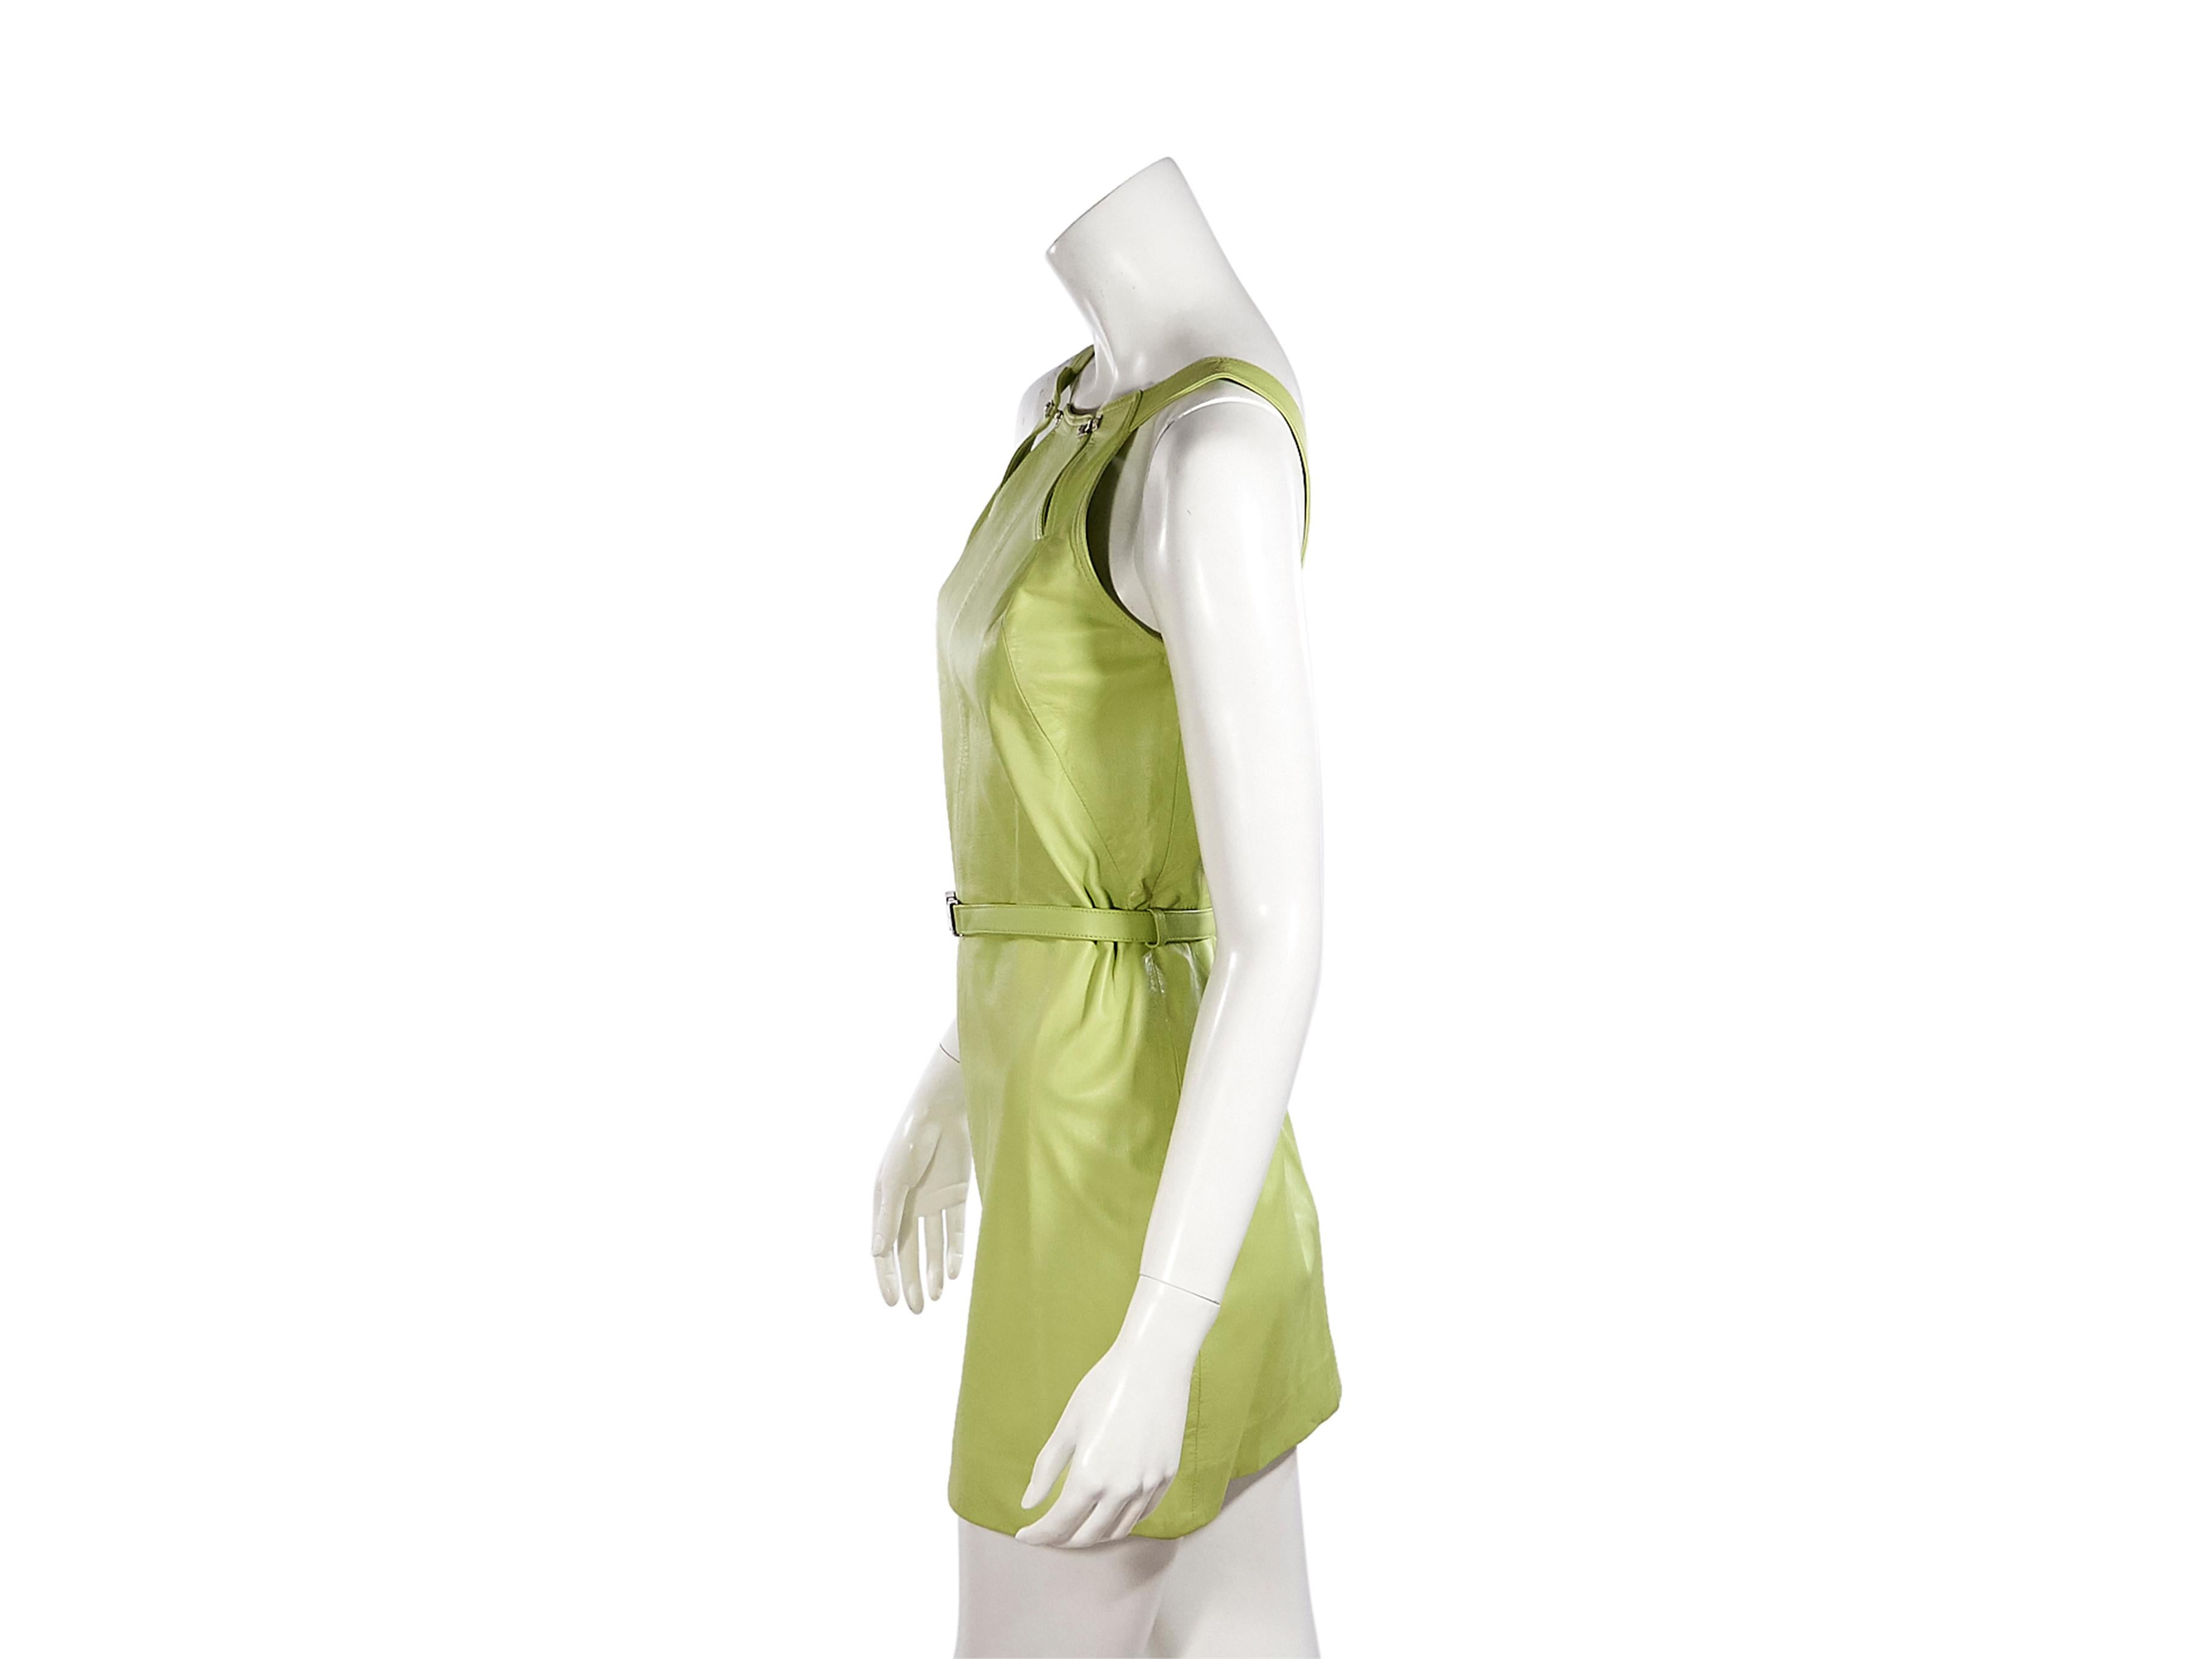 Product details:  Lime green leather sheath dress by Versace Jeans Couture.  Wide roundneck.  Sleeveless.  Belted waist.  Concealed back zip closure.  Silvertone hardware.  Label size IT 40.  34